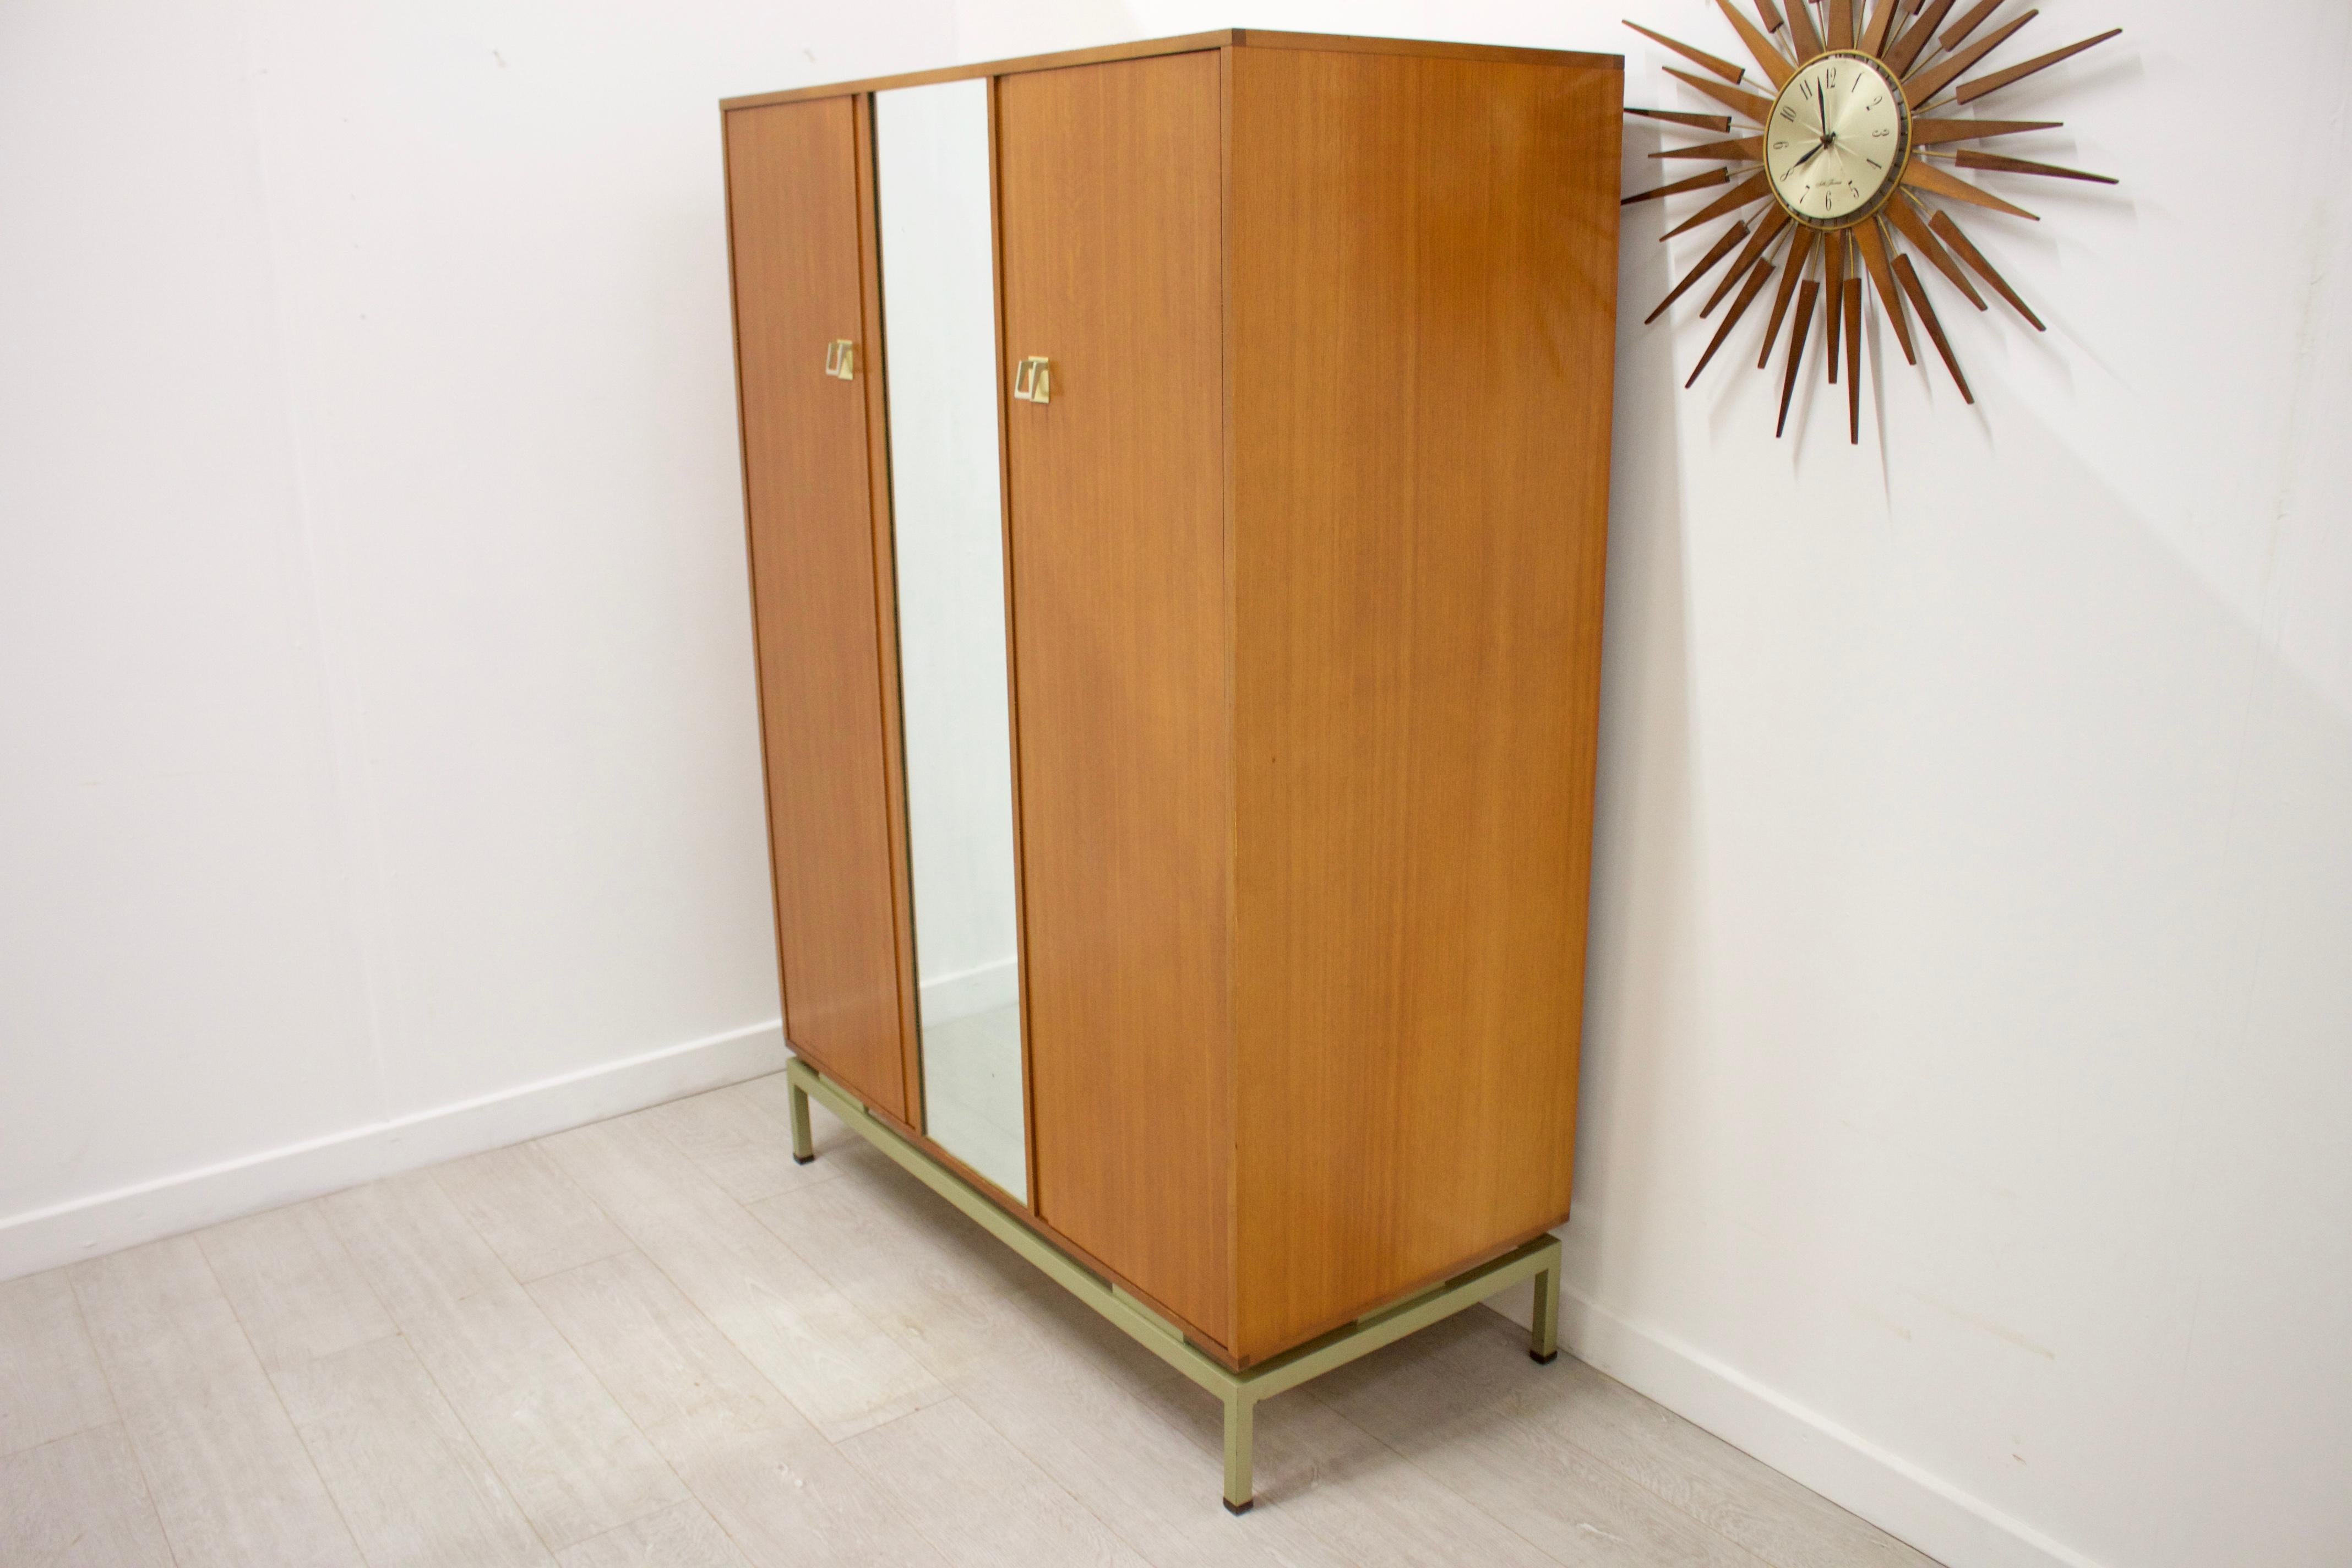 - Mid-Century Modern wardrobe
- Manufactured by G Plan in the 1960s
- Designed by Lesley Dandy
- Made from Limba wood which is similar to teak
- Featuring a hanging rail the full width of the wardrobe.